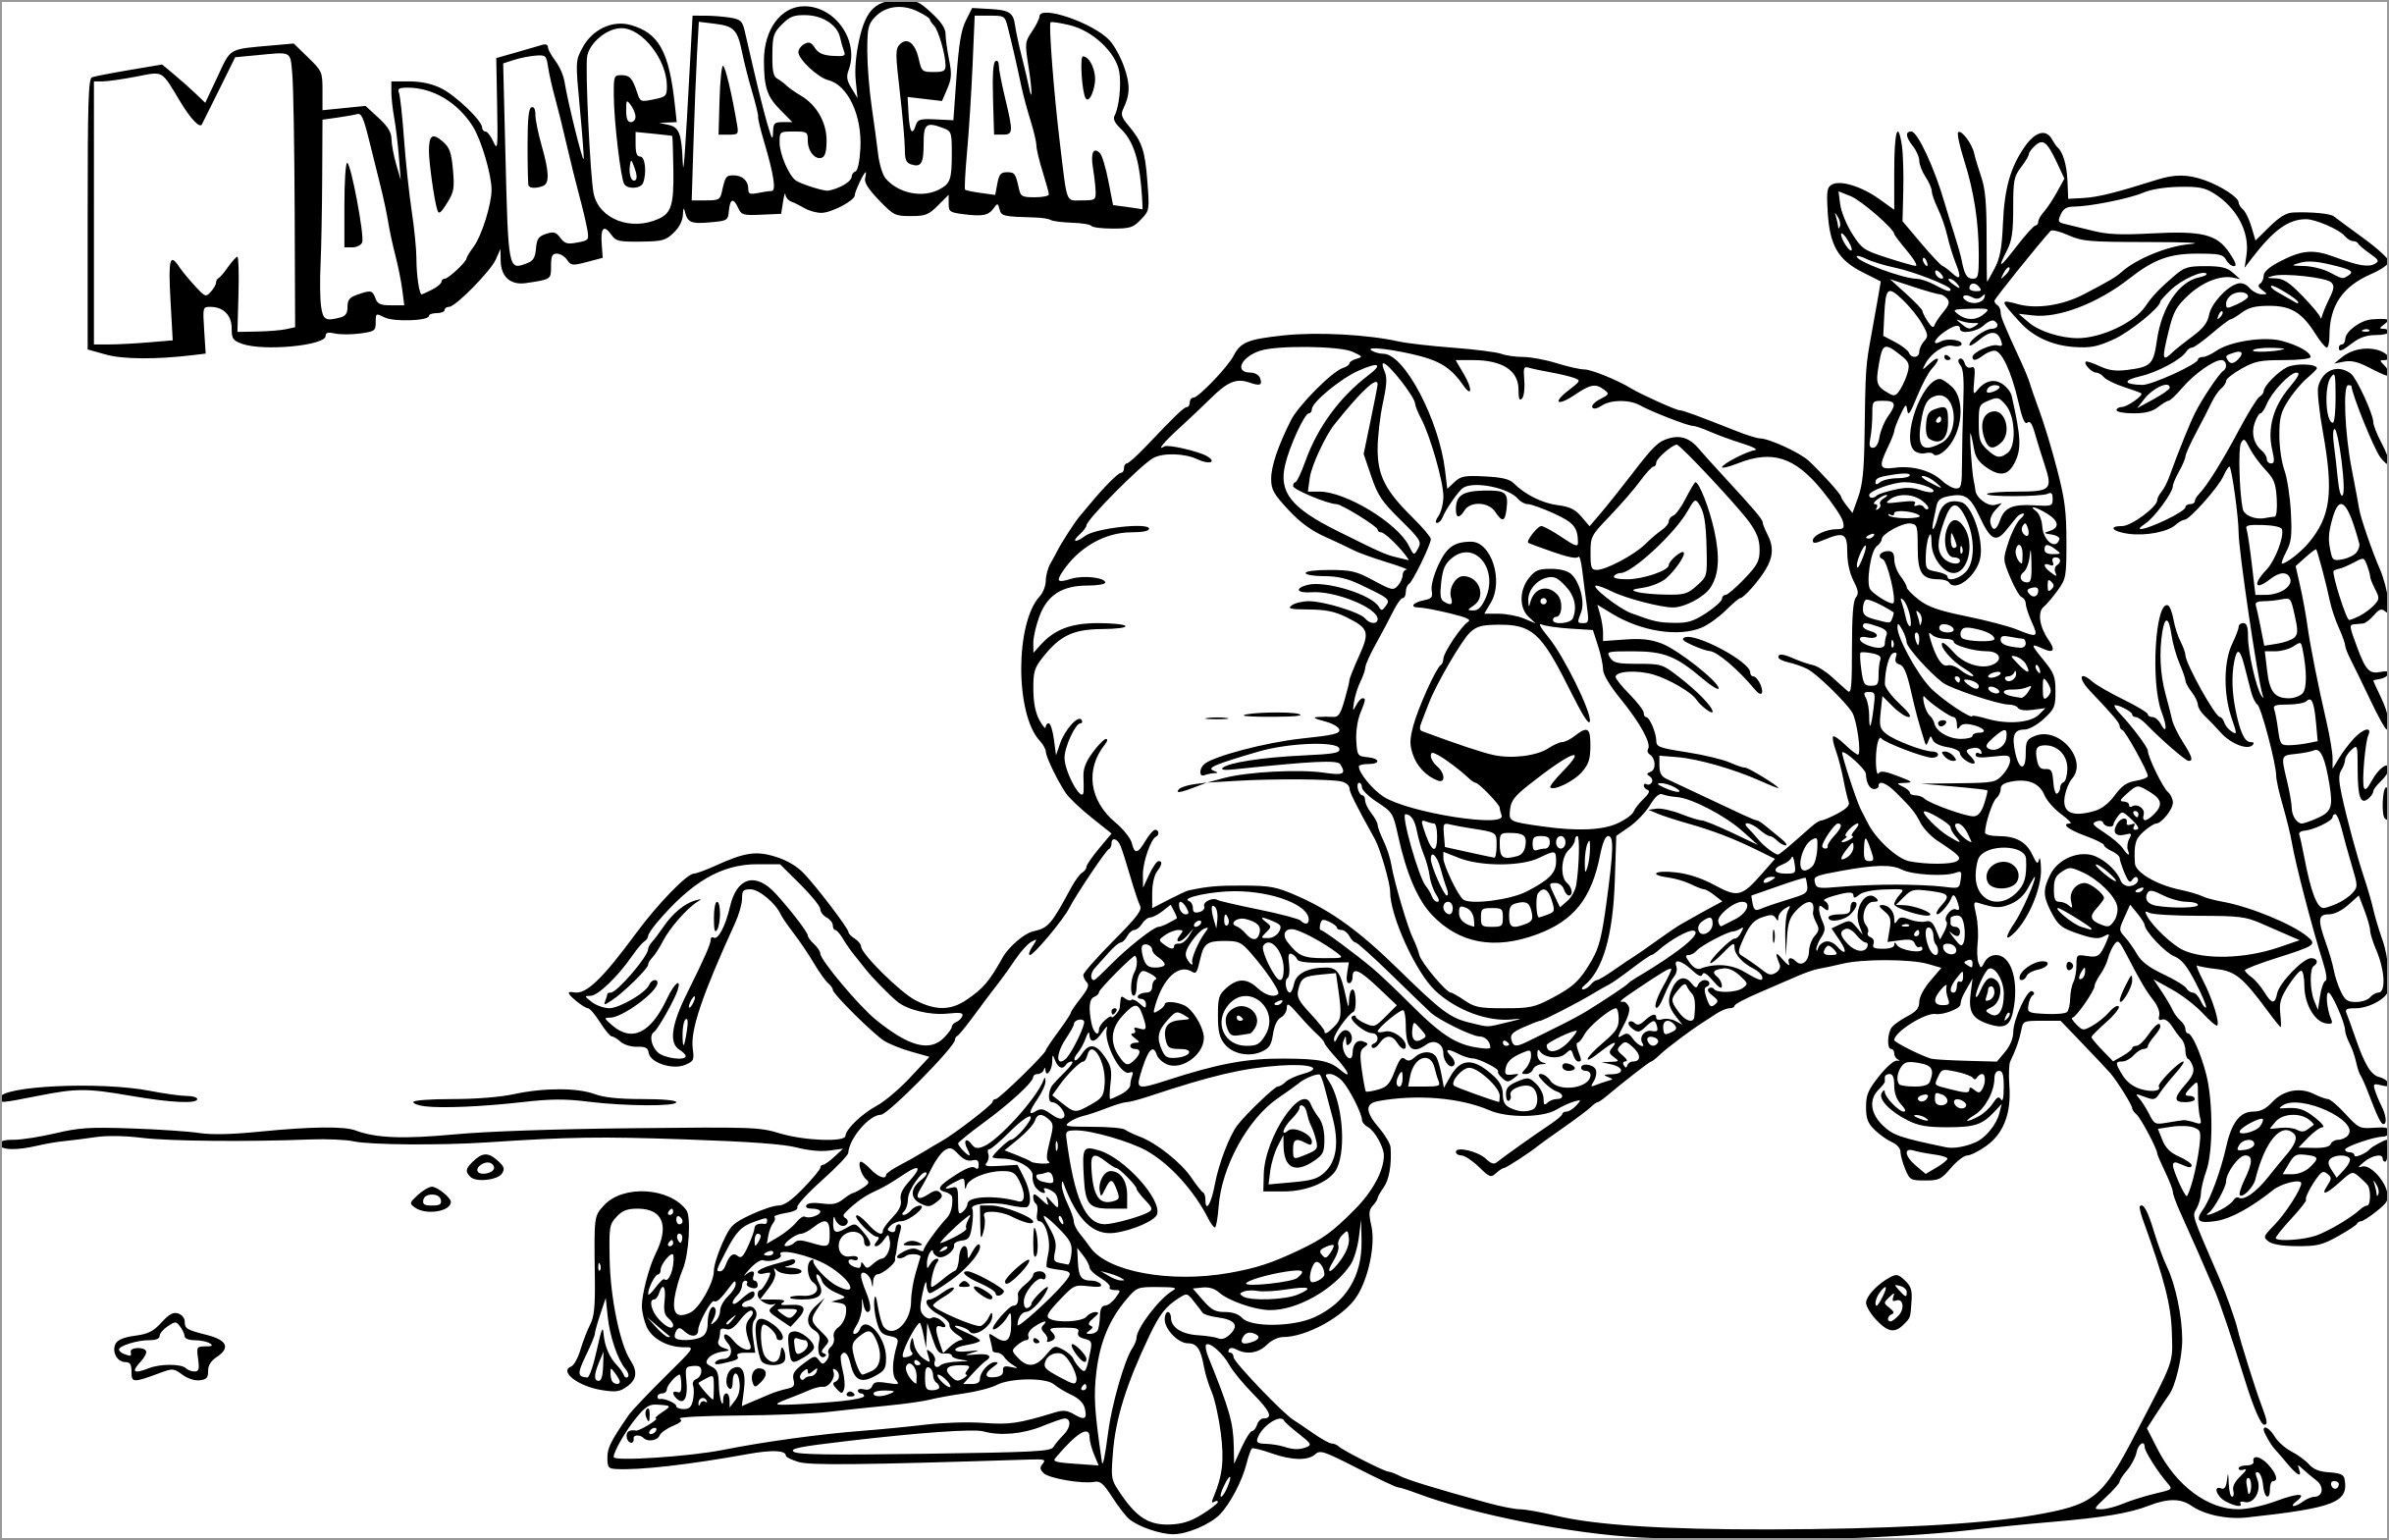 Madagascar Animals Coloring Page to Print